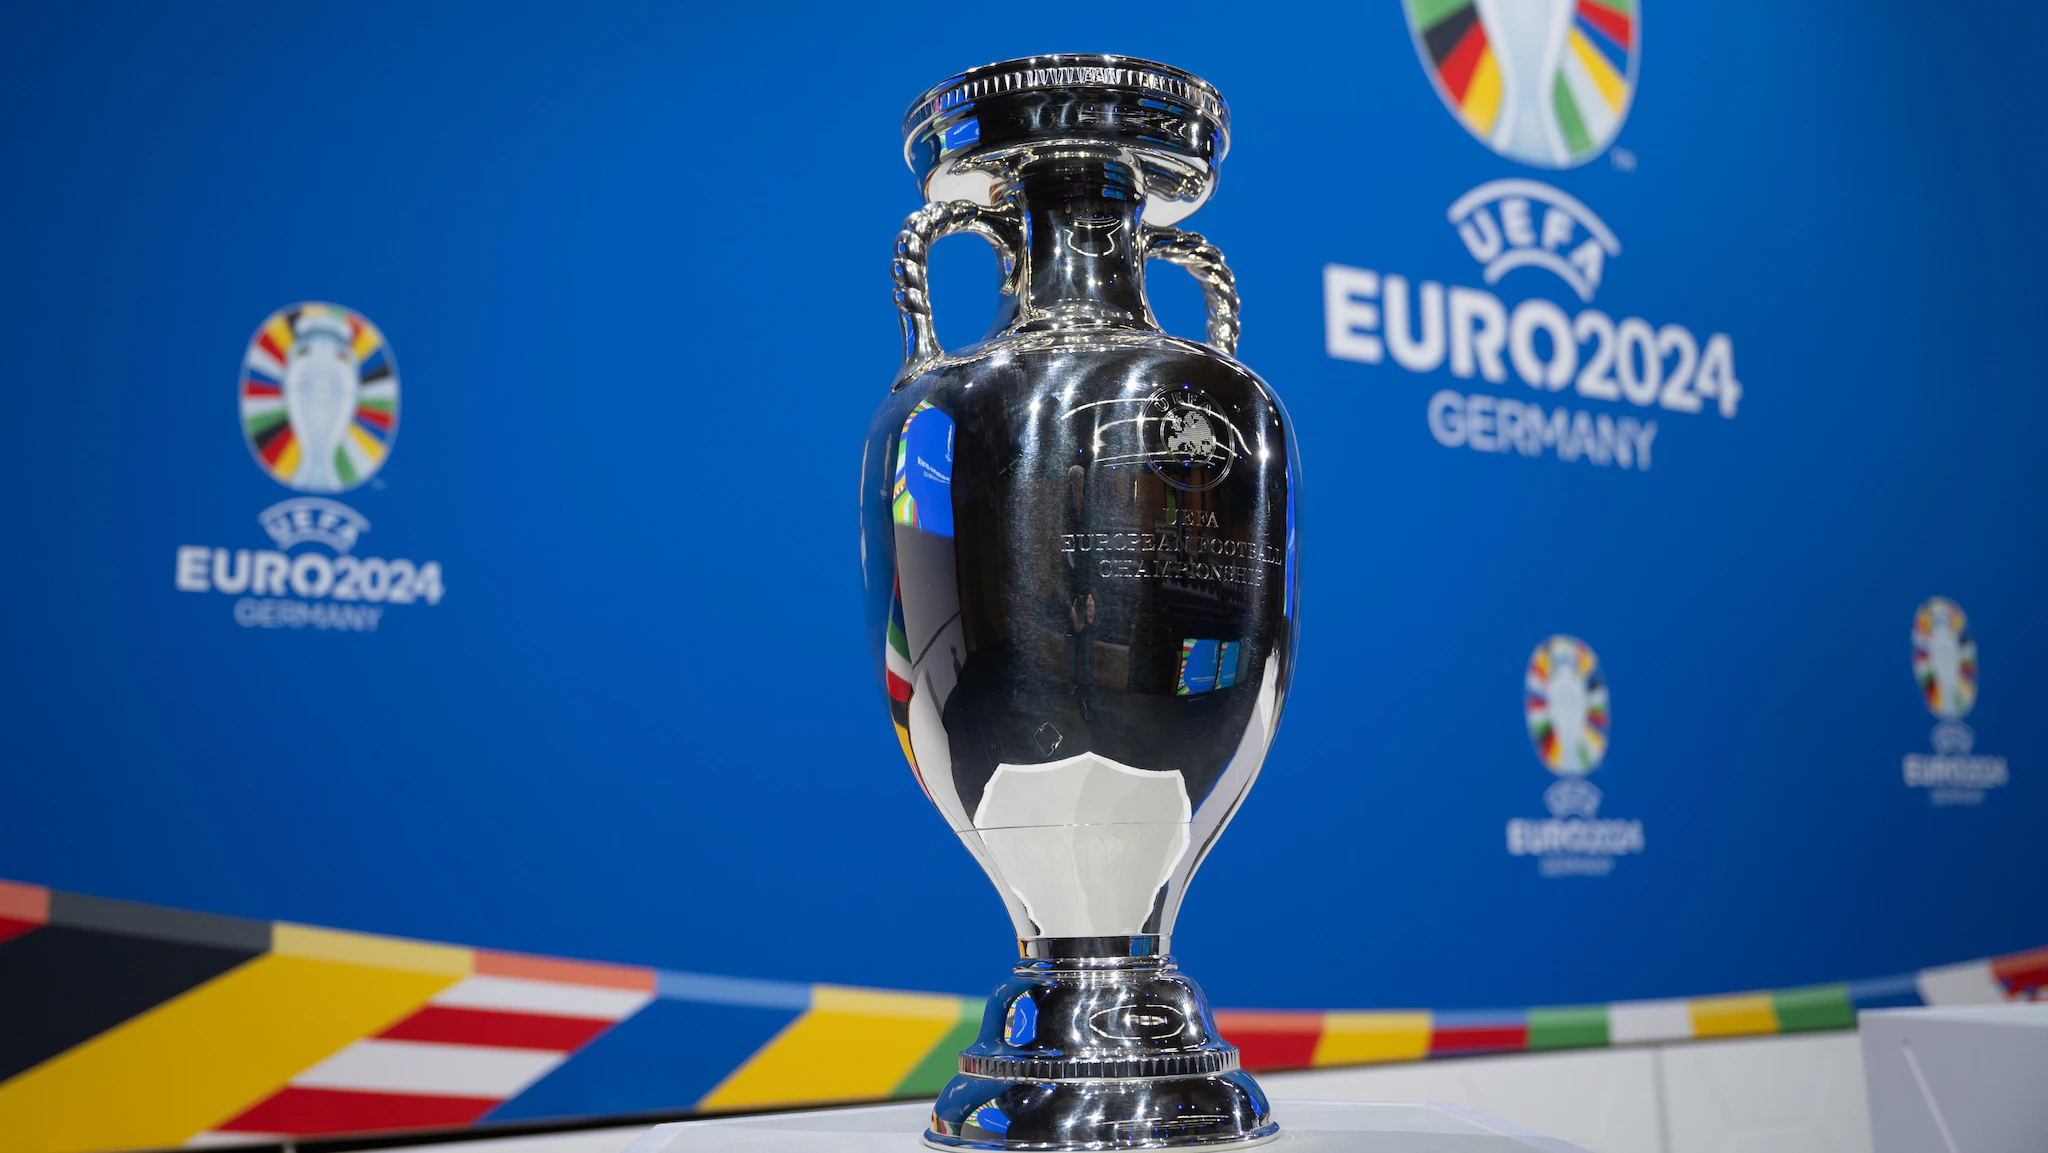 EURO2024CUP